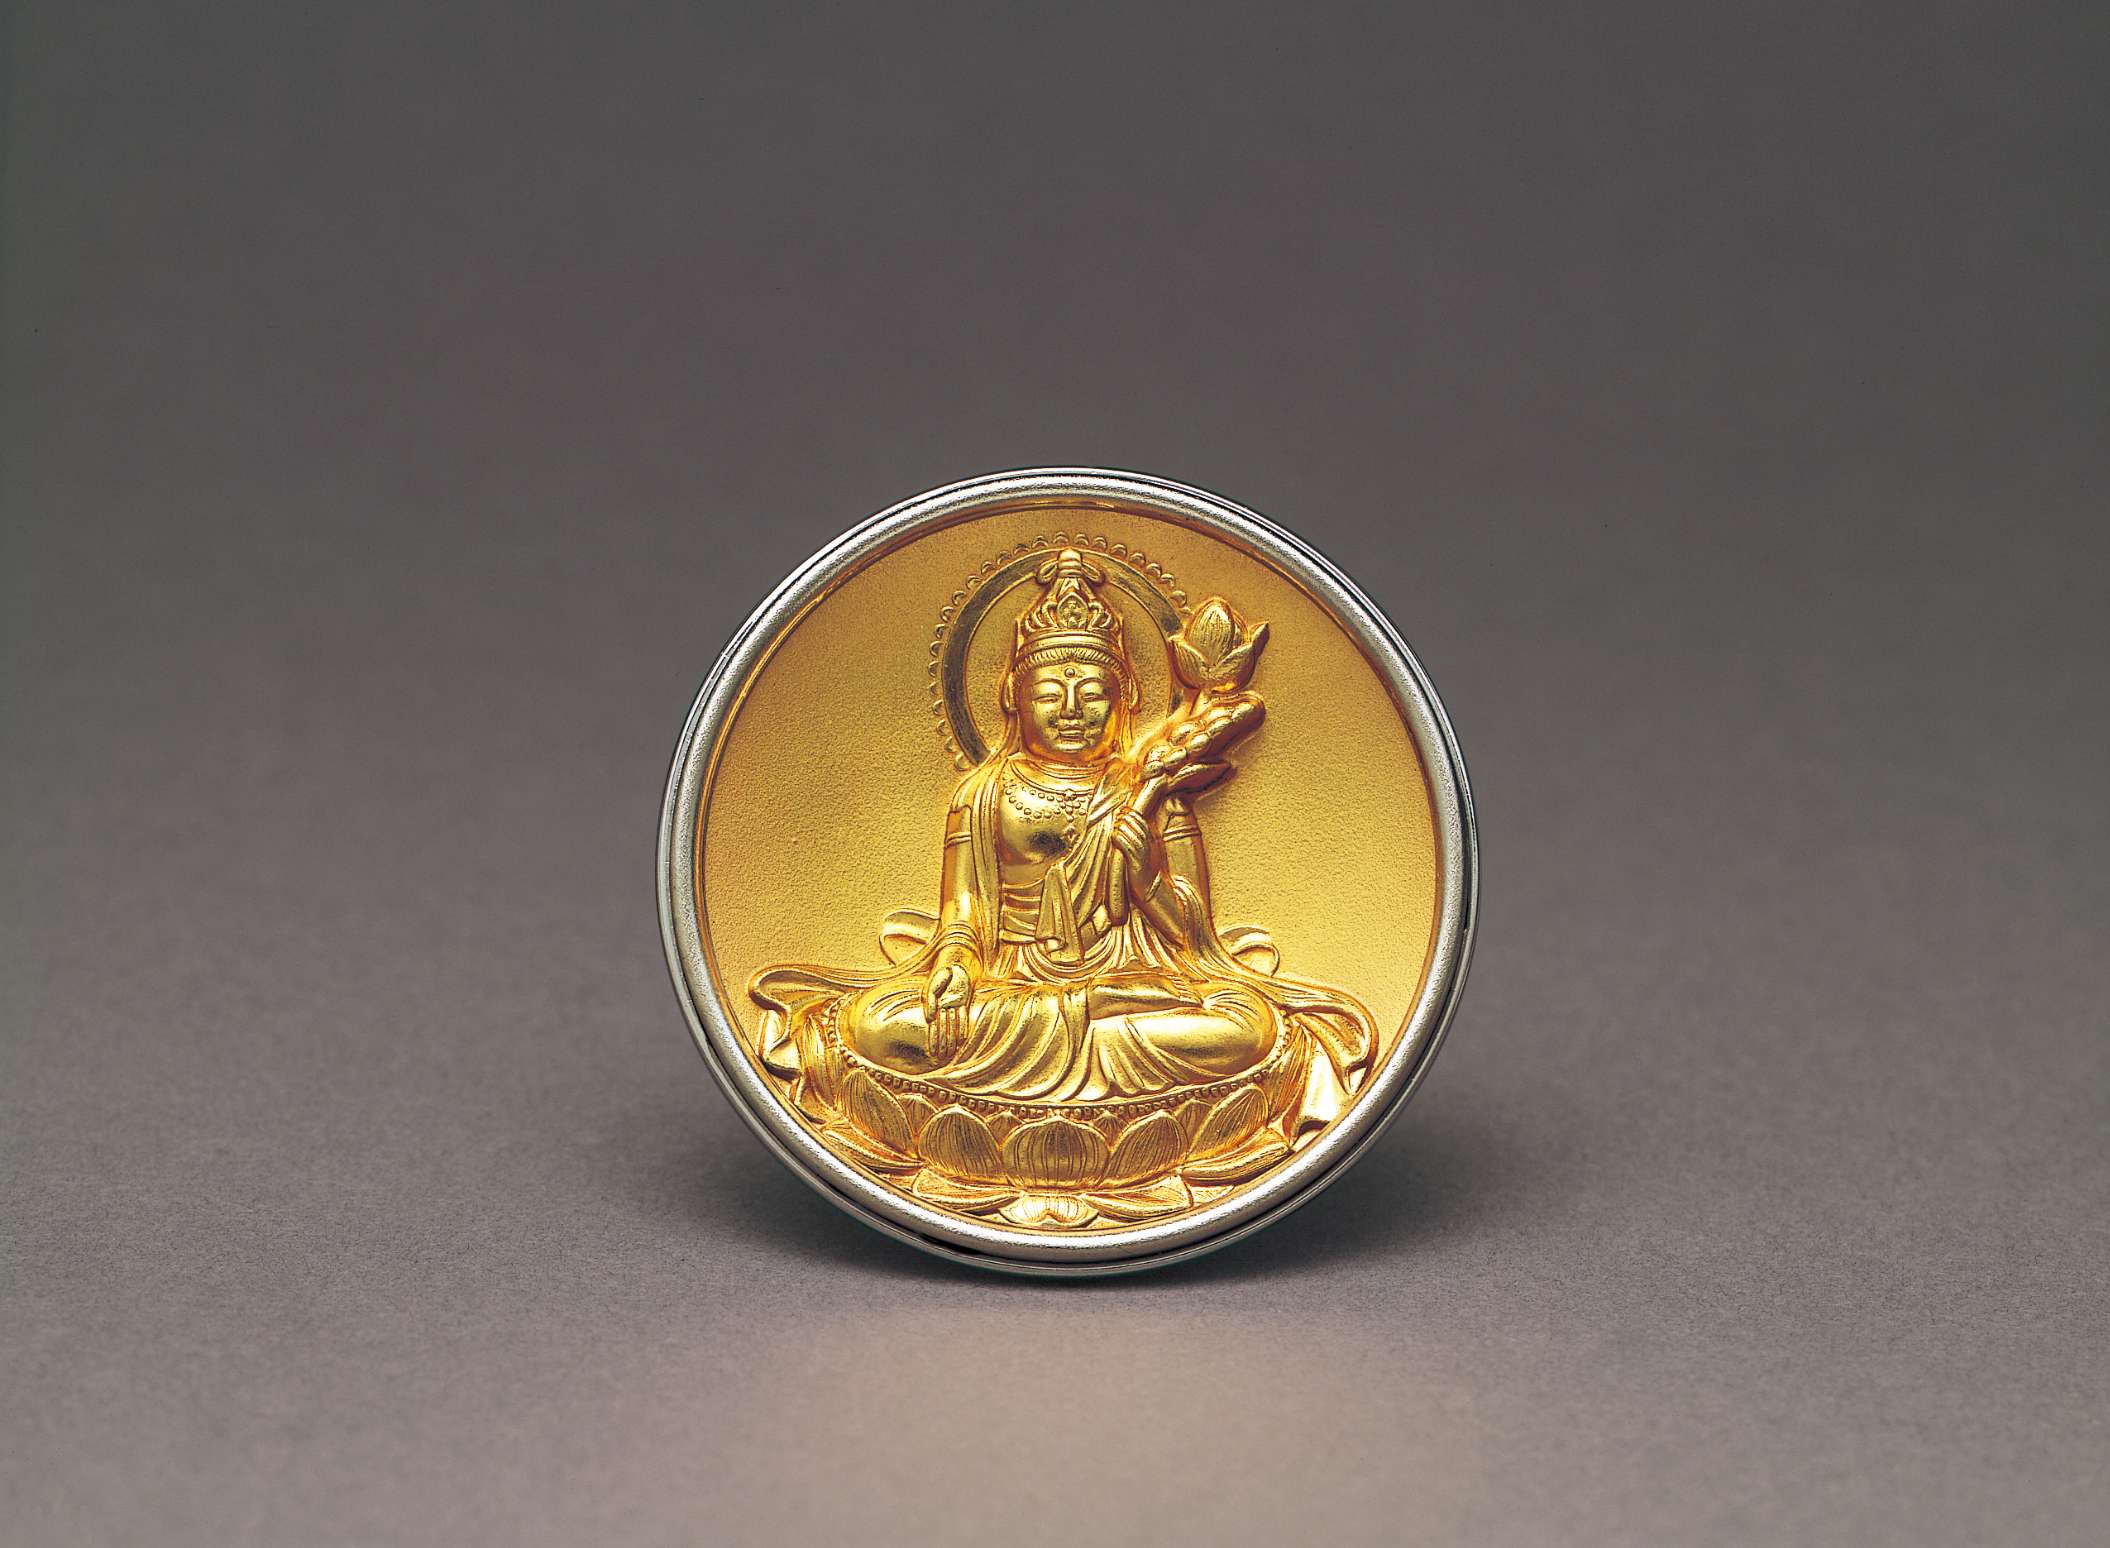 A circular disc of gold depicting in relief a two-armed figure seated on a lotus, holding a stem with a lotus on the end in its left hand, framed by a silver rim.